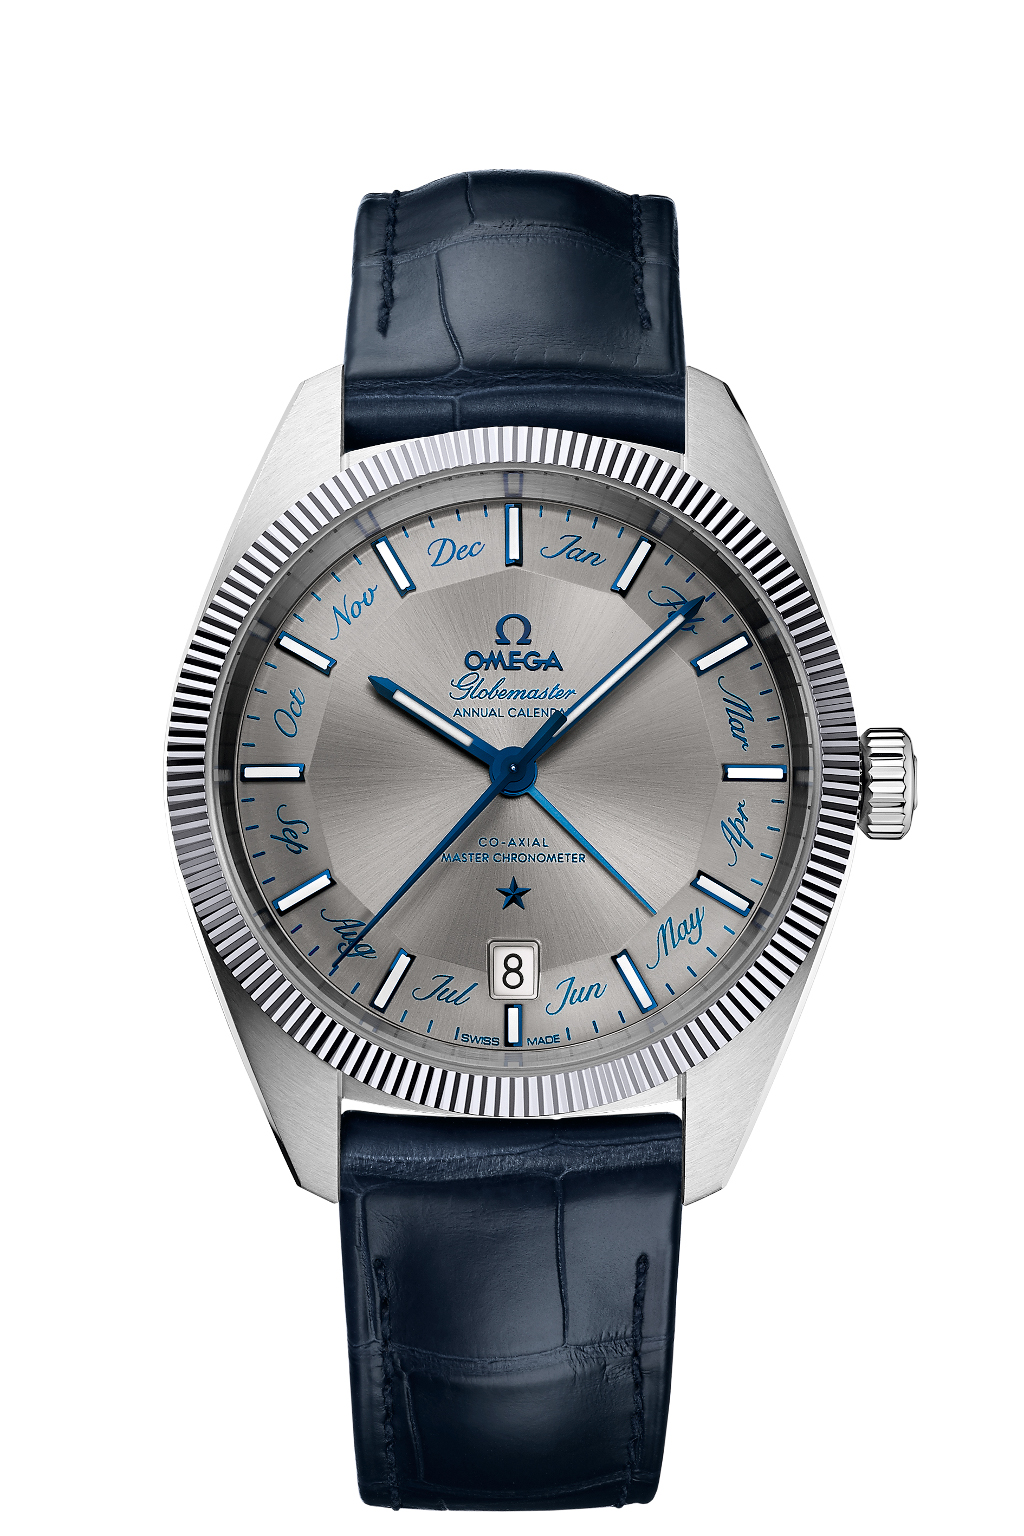 The Globemaste rhad undergone some changes, including a 2mm increase in its case diameter.